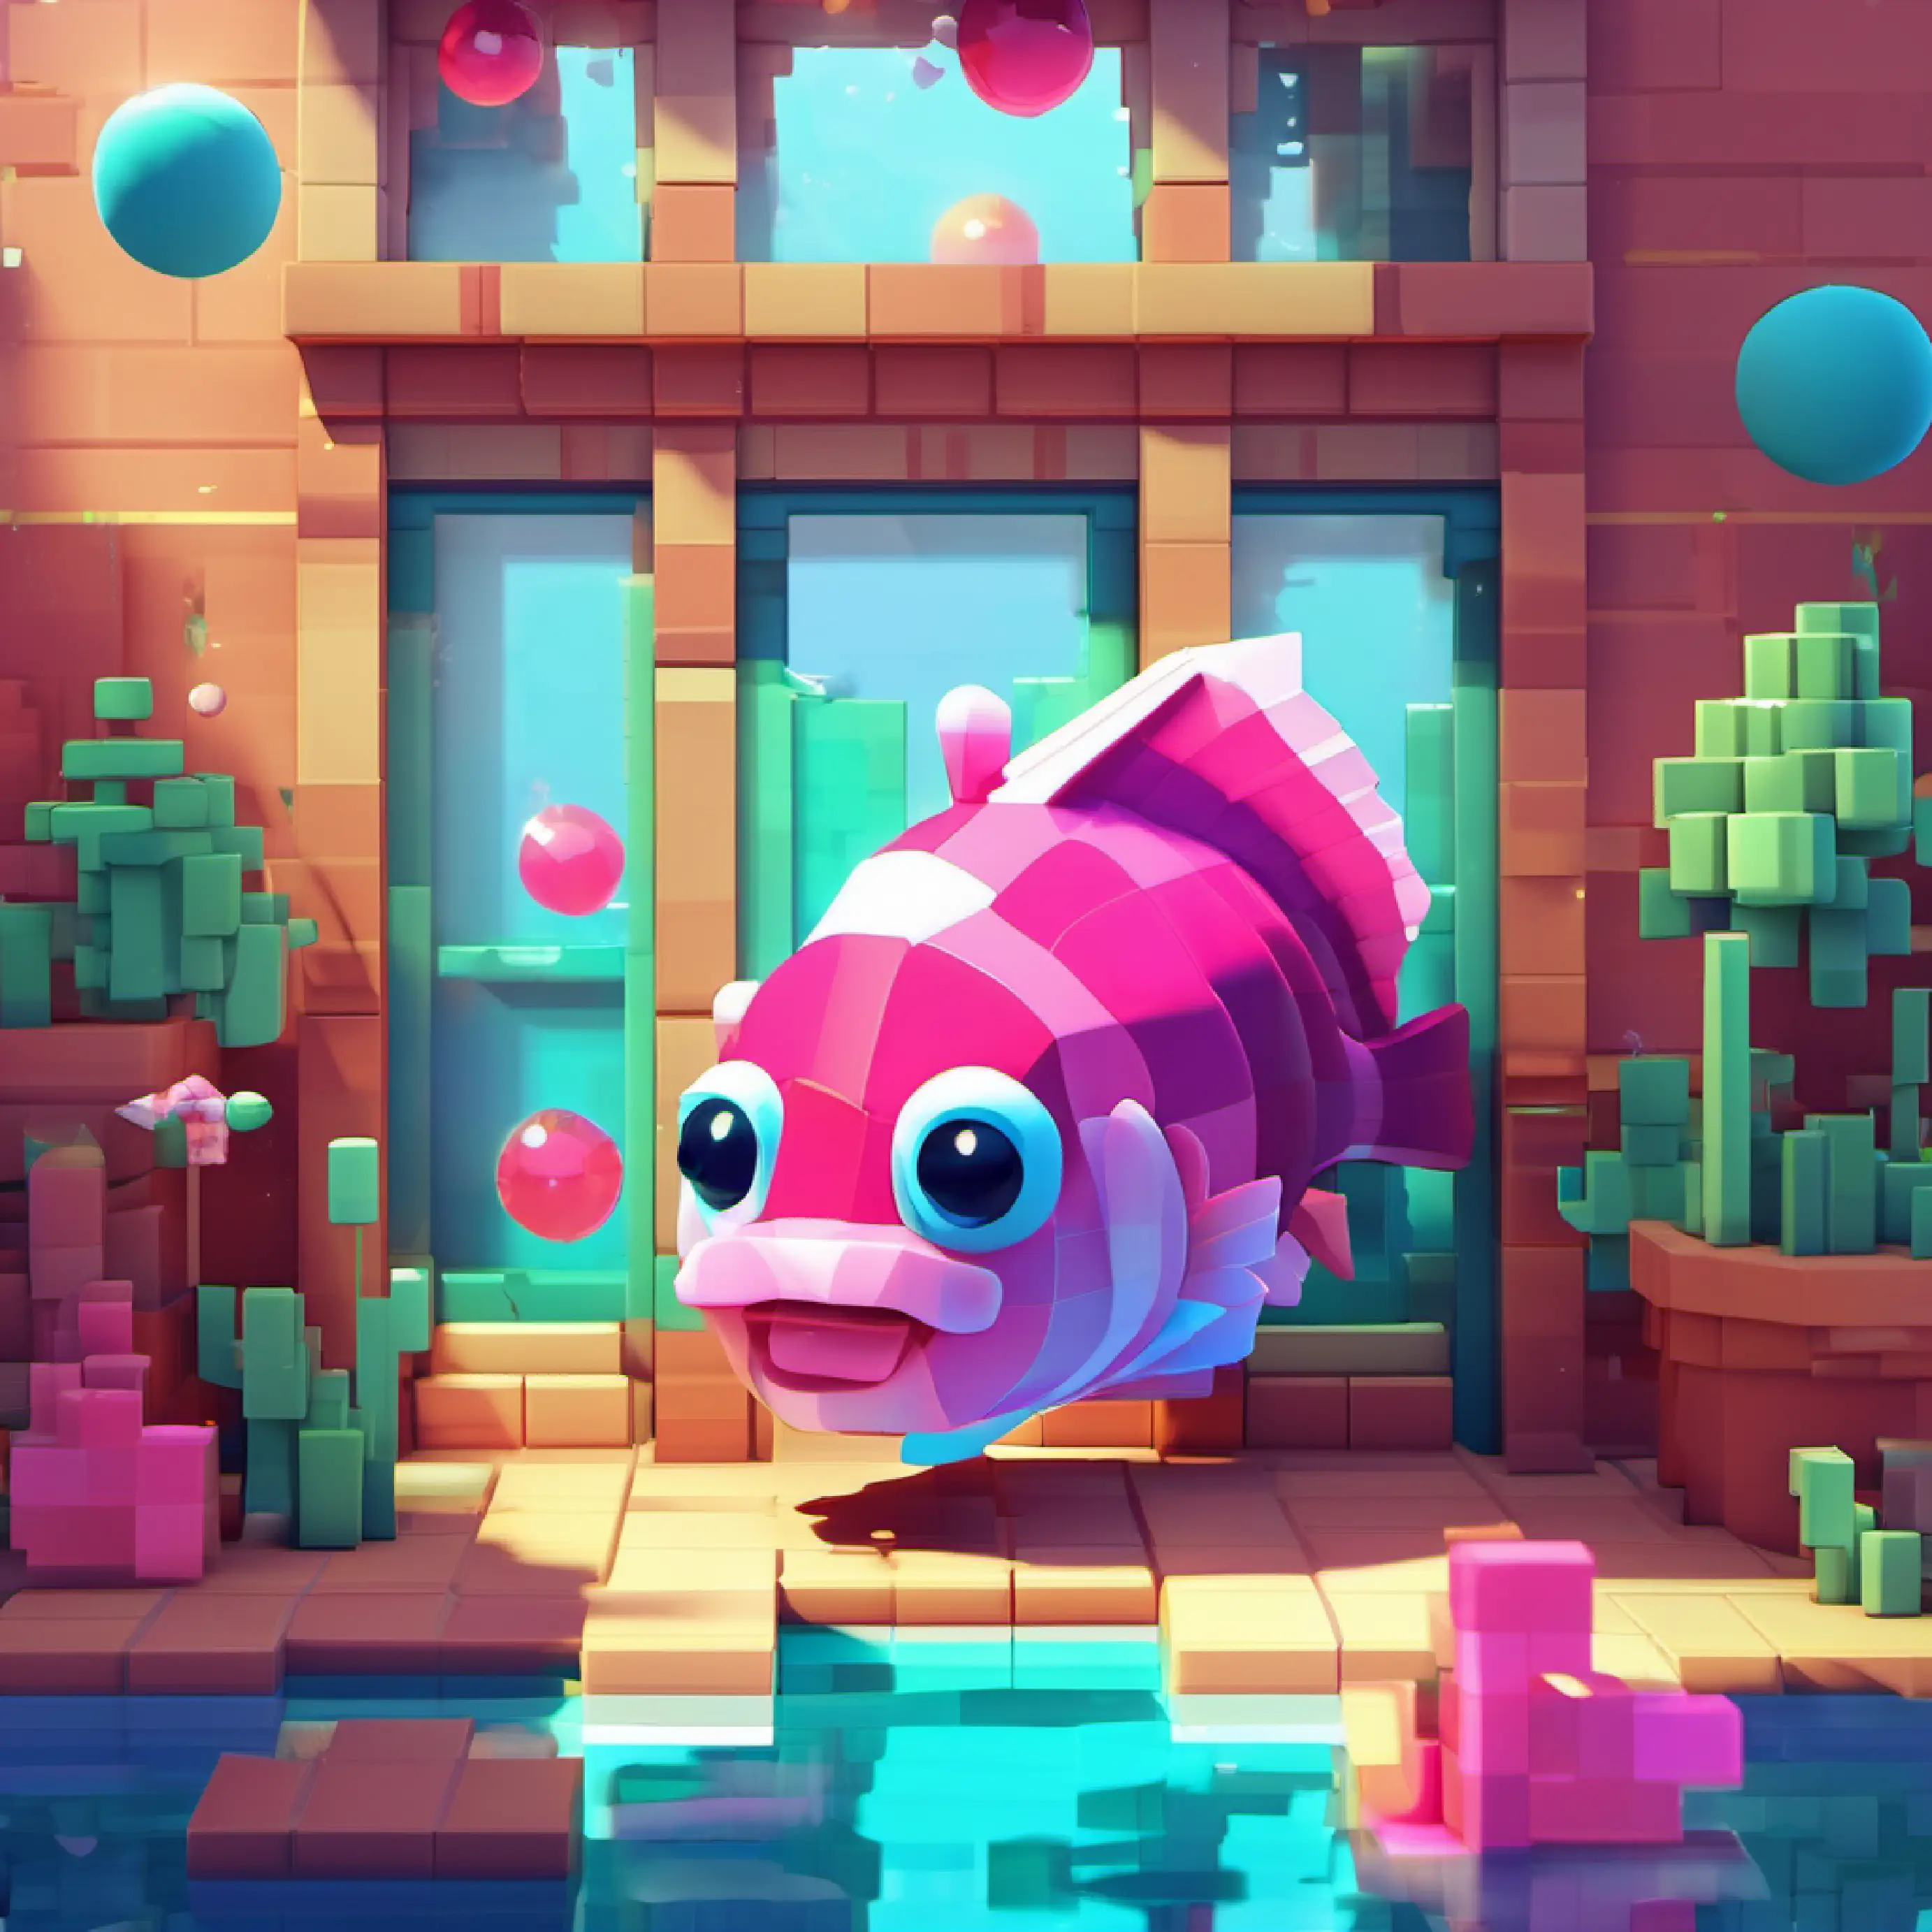 Bubblegum fish is part of their new story, singing about friendship.